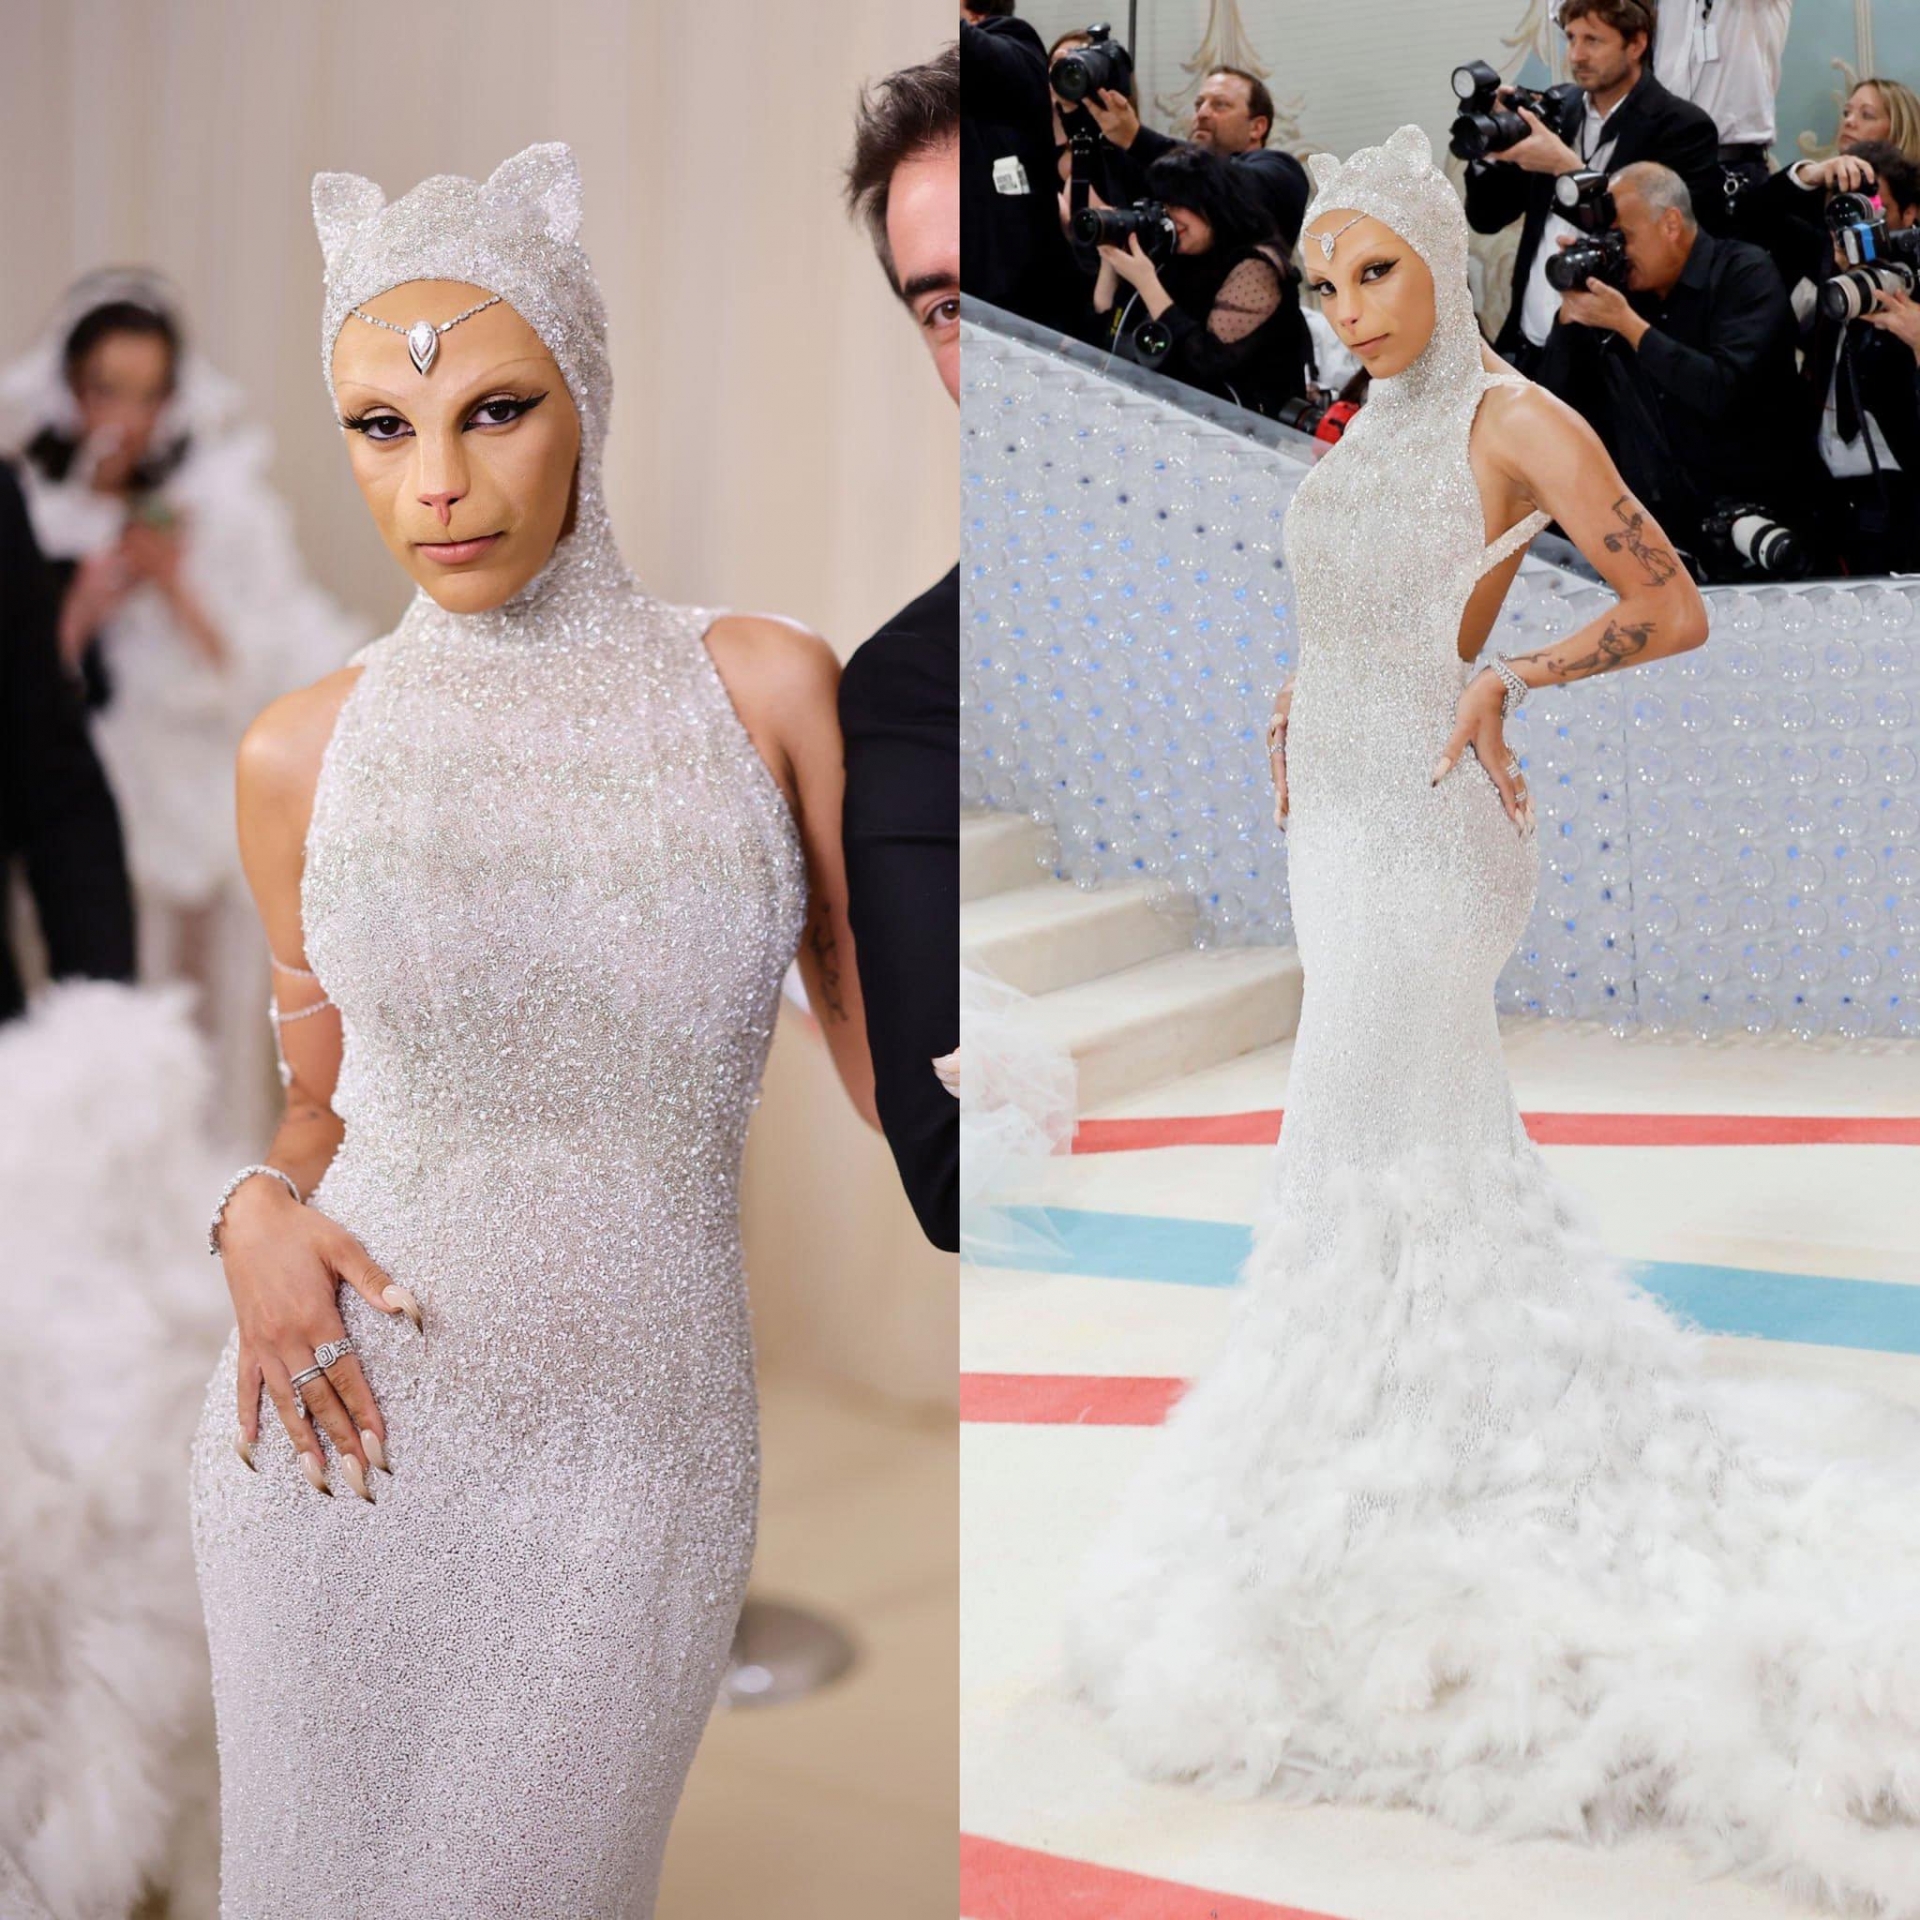 Cats dominated the 2023: Doja Cat and Jared Leto Are the Cat’s Meow at the Met Gala 2023 1